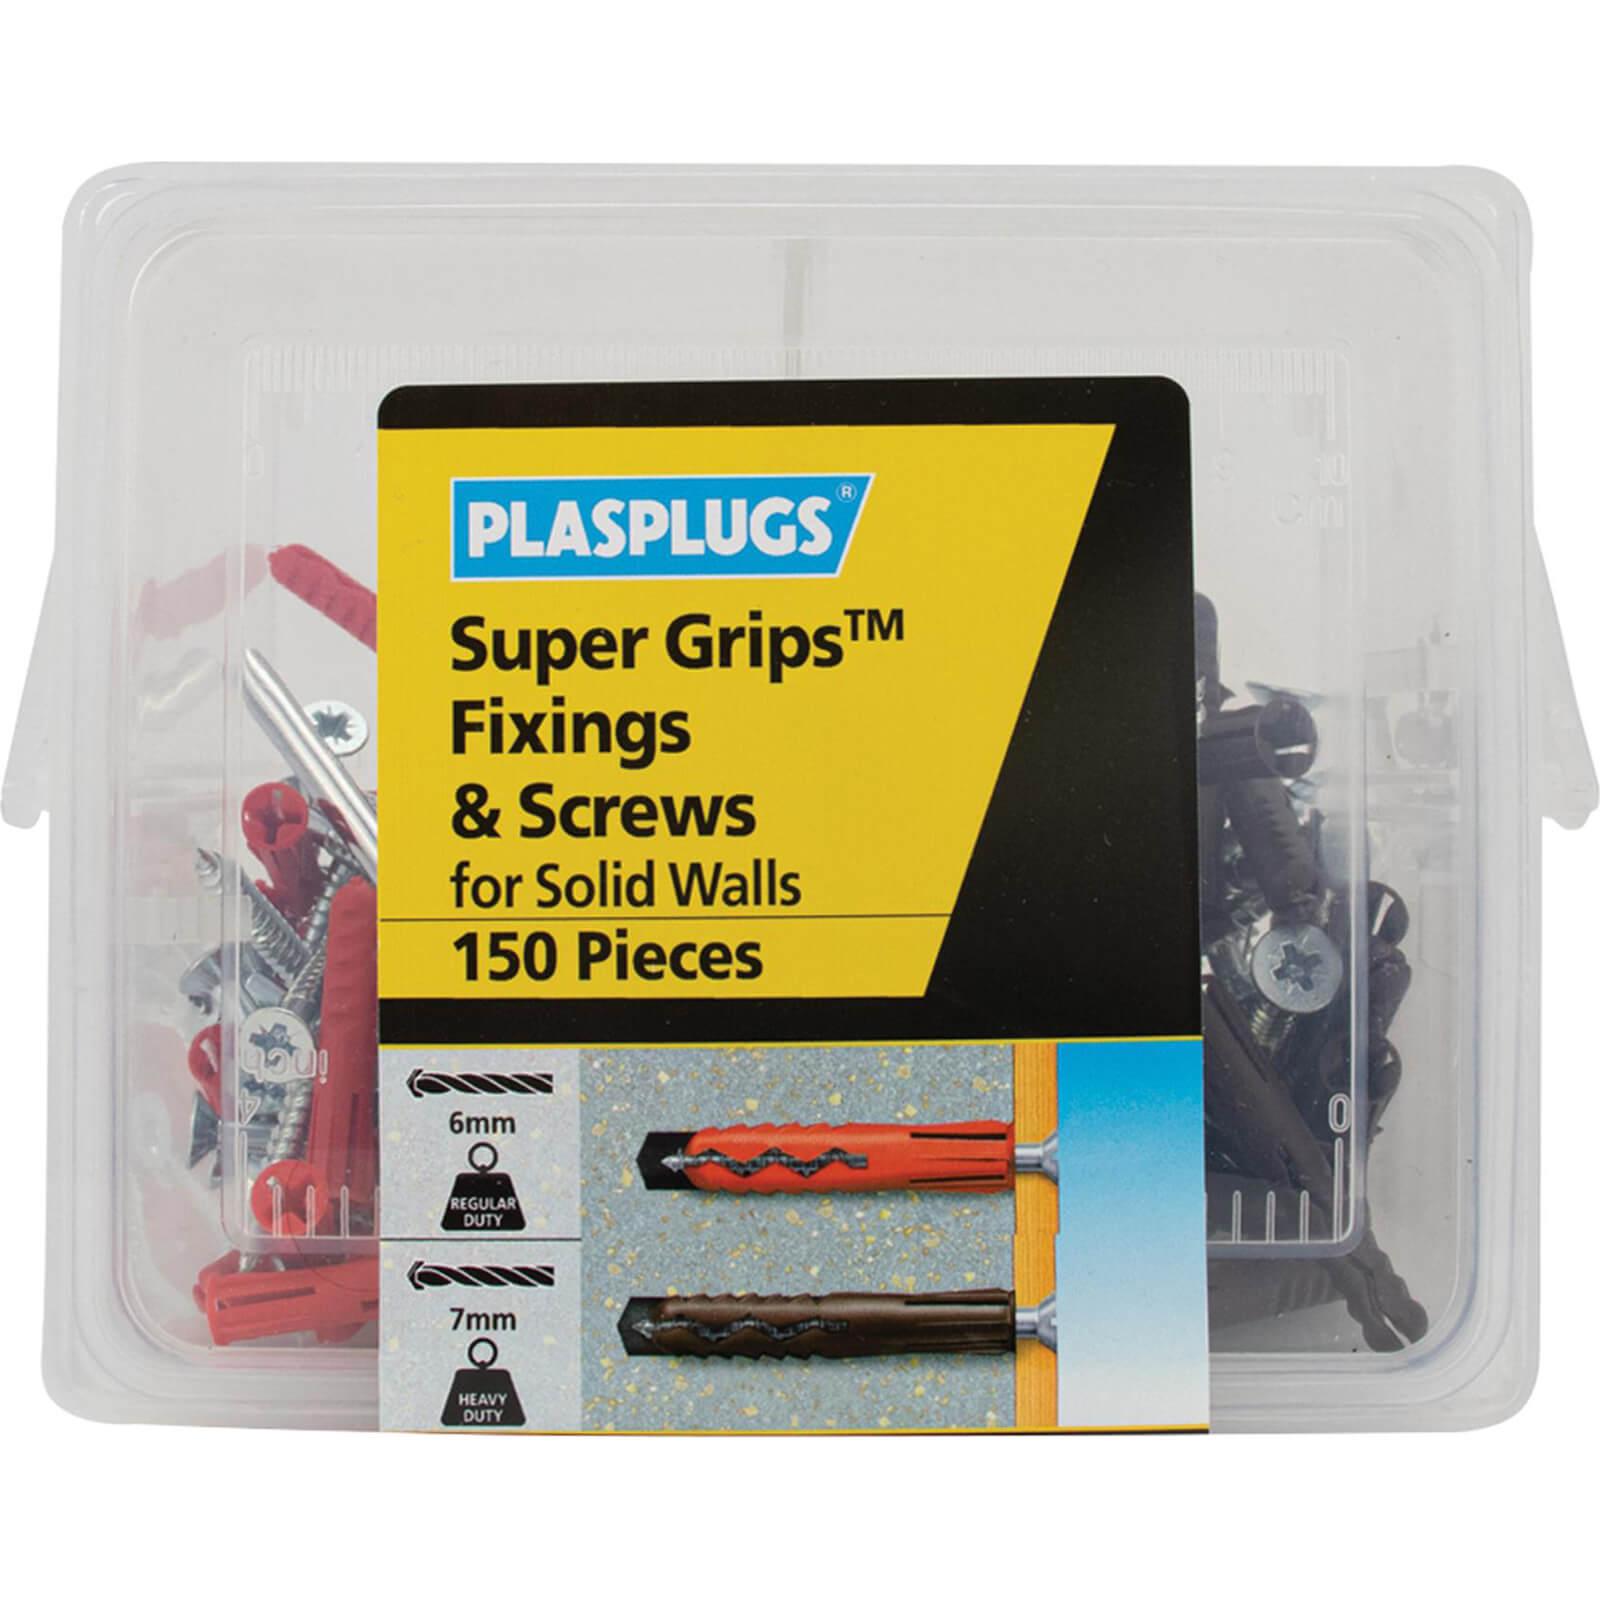 Image of Plasplugs 150 Piece Super Grips Fixings and Screws Kit for Solid Walls